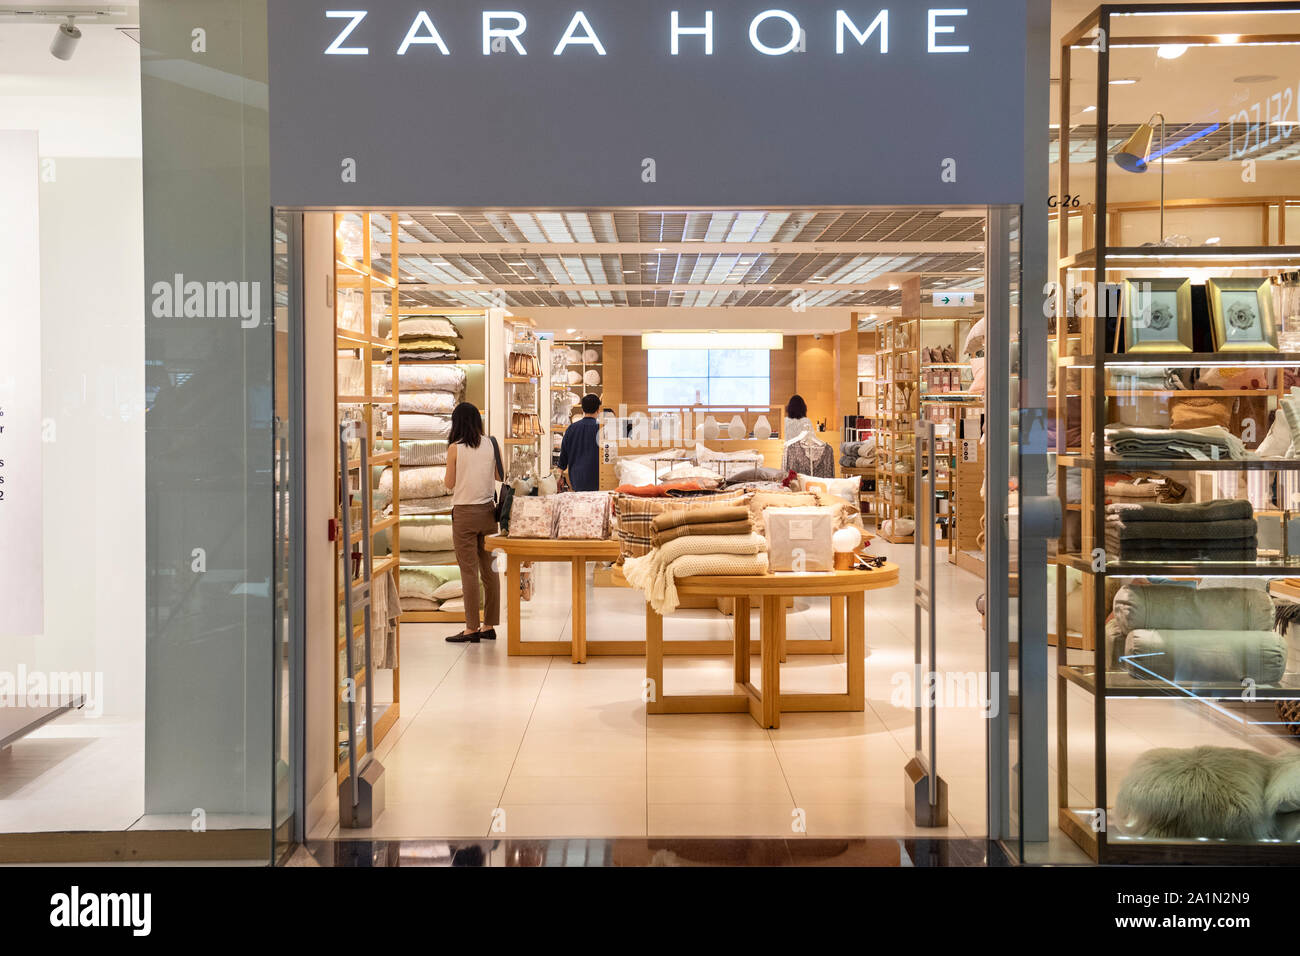 Zara Home High Resolution Stock Photography and Images - Alamy